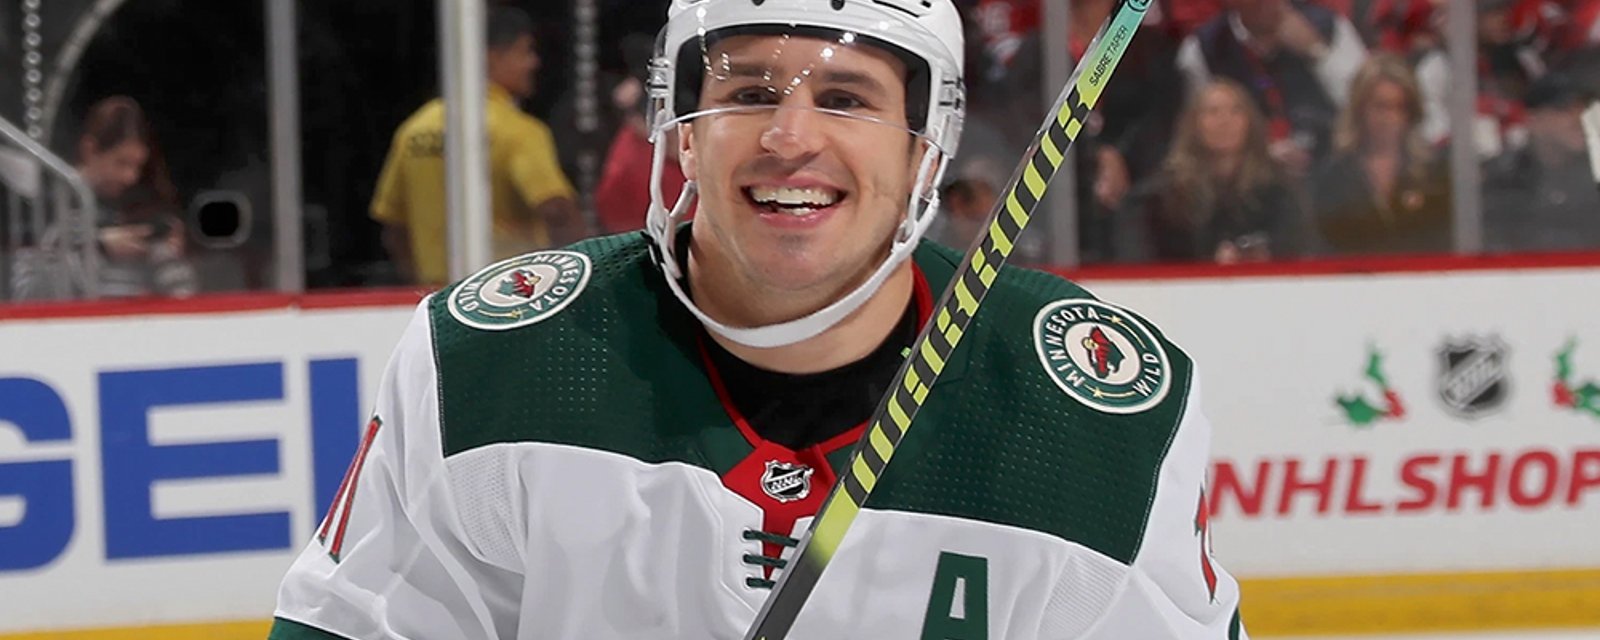 Zach Parise throws some shade at Wild after joining Islanders 